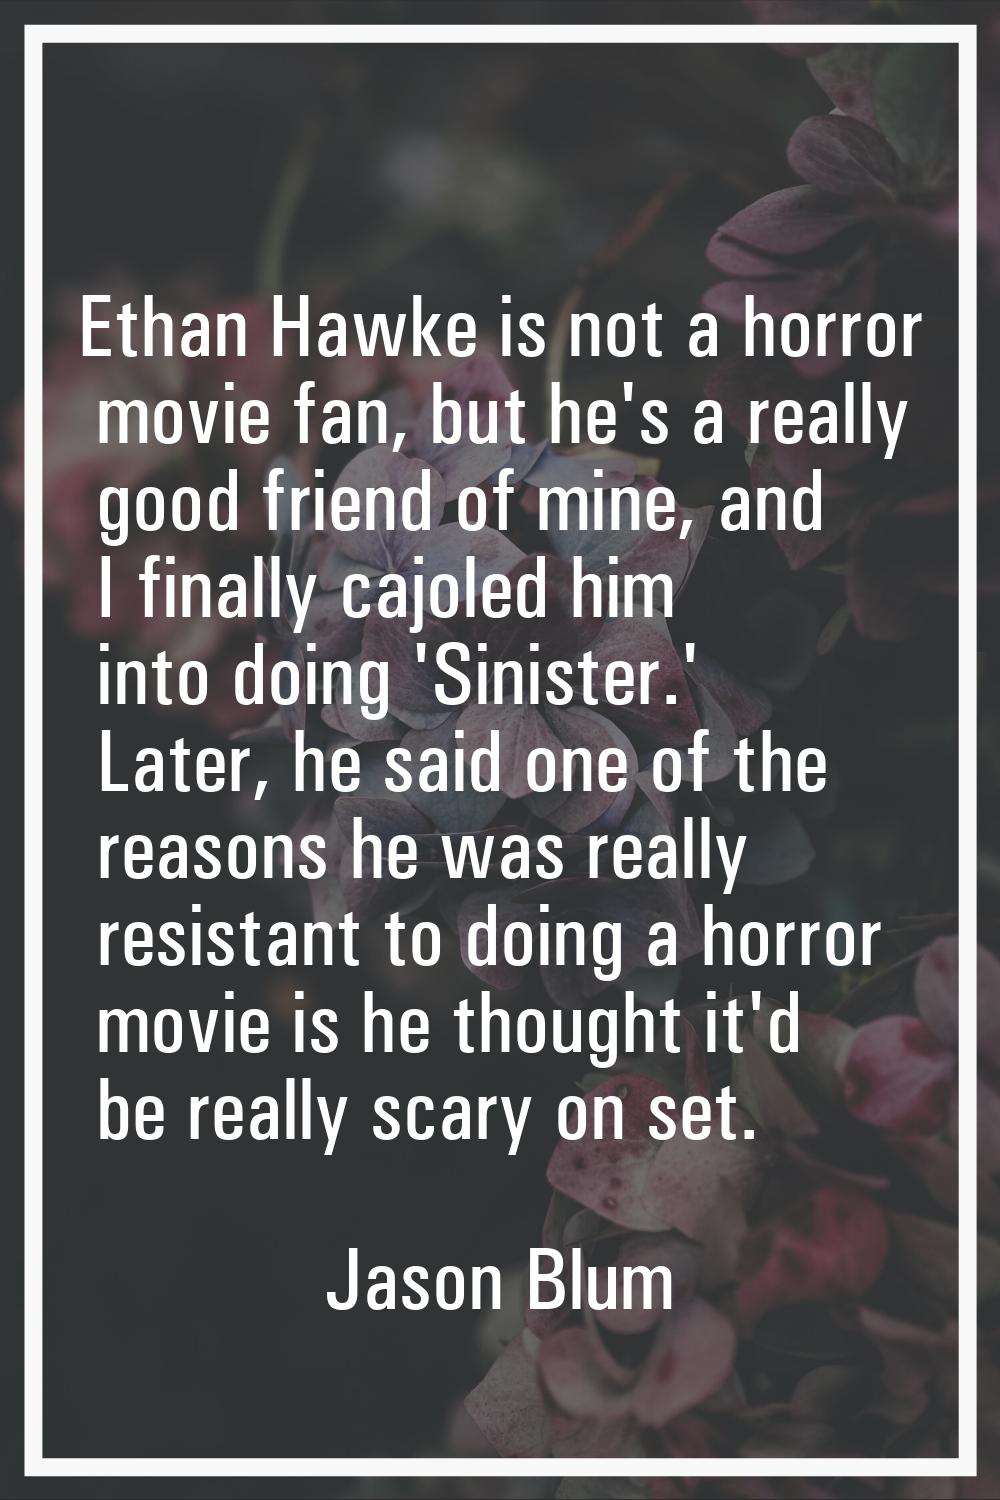 Ethan Hawke is not a horror movie fan, but he's a really good friend of mine, and I finally cajoled